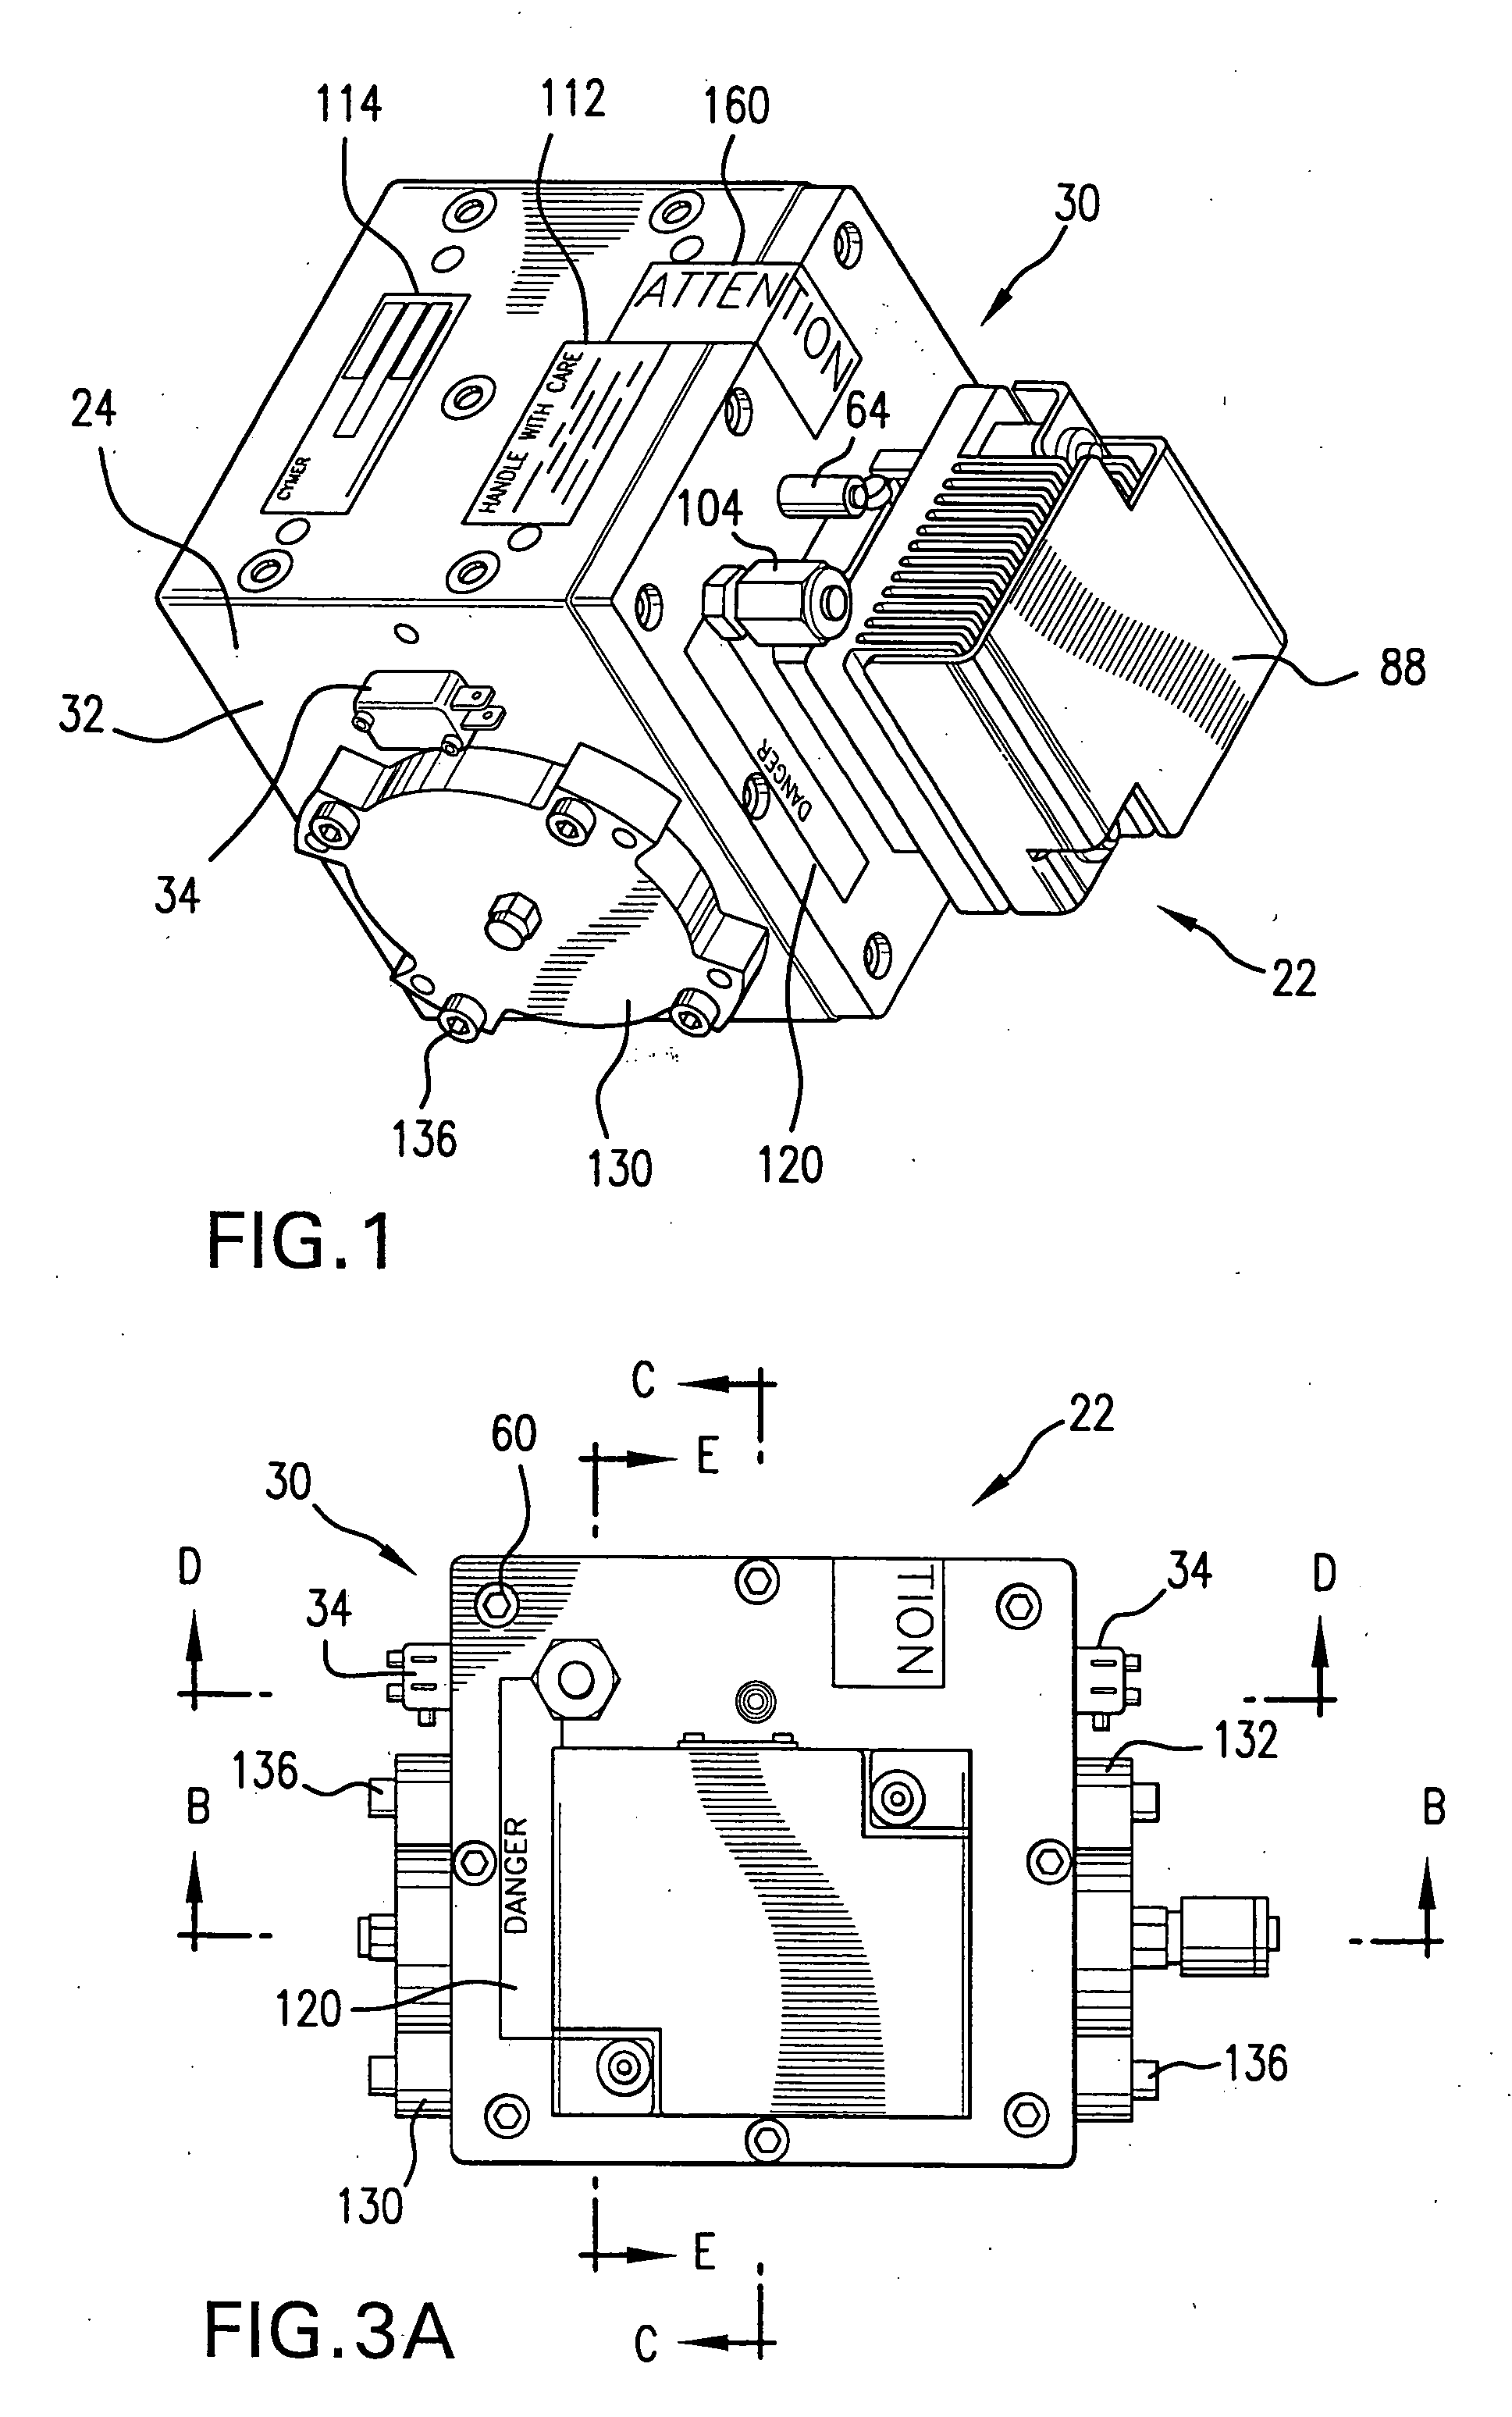 Gas discharge laser light source beam delivery unit